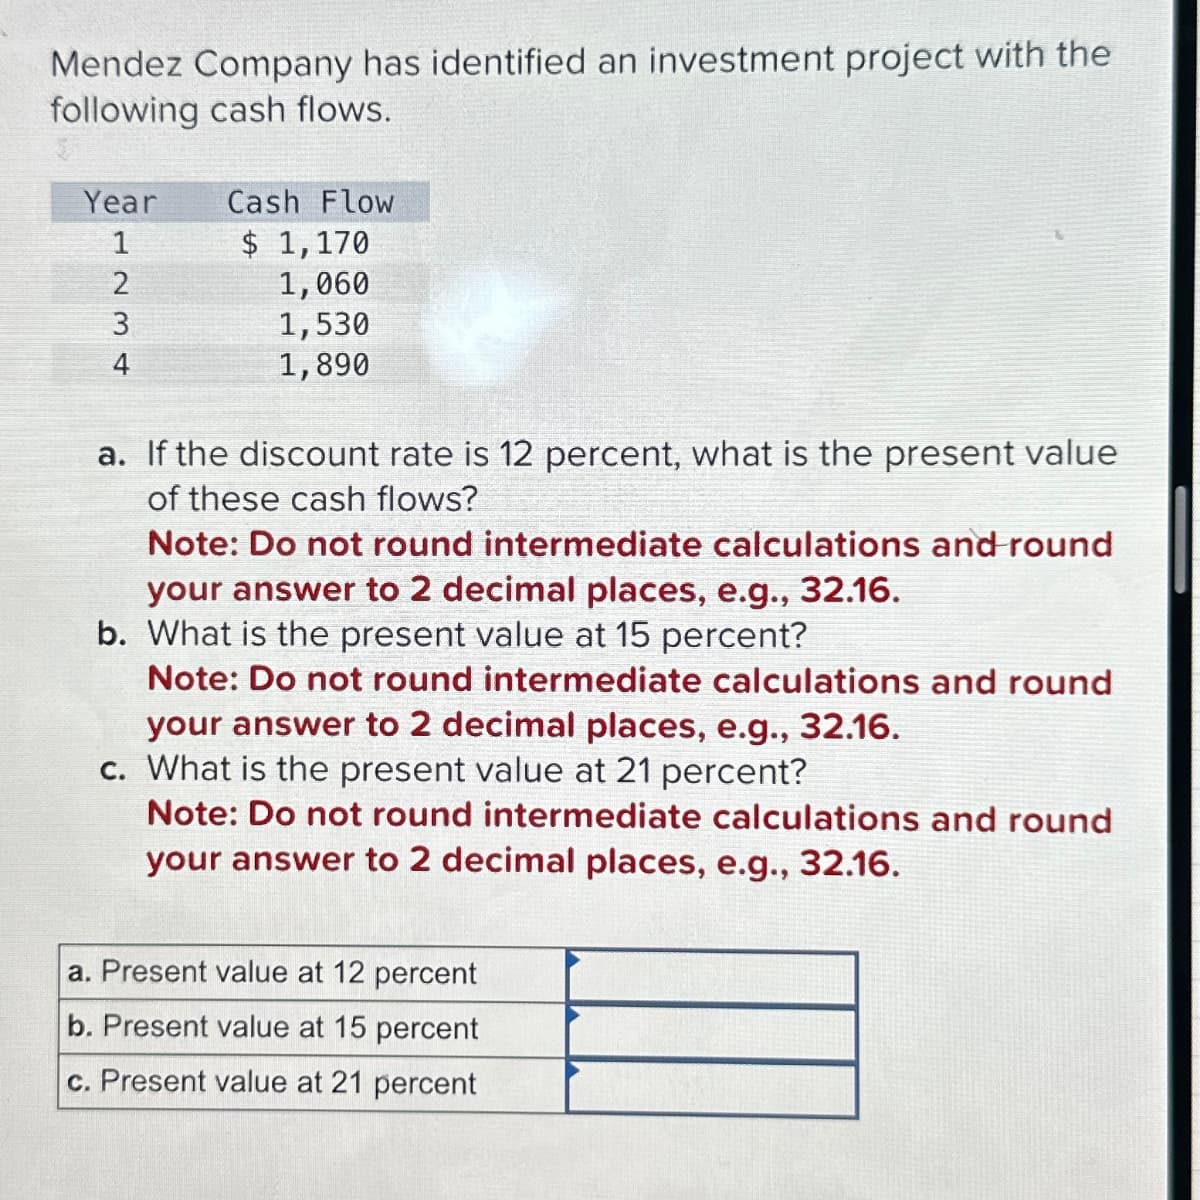 Mendez Company has identified an investment project with the
following cash flows.
Year
1234
Cash Flow
$ 1,170
1,060
1,530
1,890
a. If the discount rate is 12 percent, what is the present value
of these cash flows?
Note: Do not round intermediate calculations and round
your answer to 2 decimal places, e.g., 32.16.
b. What is the present value at 15 percent?
Note: Do not round intermediate calculations and round
your answer to 2 decimal places, e.g., 32.16.
c. What is the present value at 21 percent?
Note: Do not round intermediate calculations and round
your answer to 2 decimal places, e.g., 32.16.
a. Present value at 12 percent
b. Present value at 15 percent
c. Present value at 21 percent